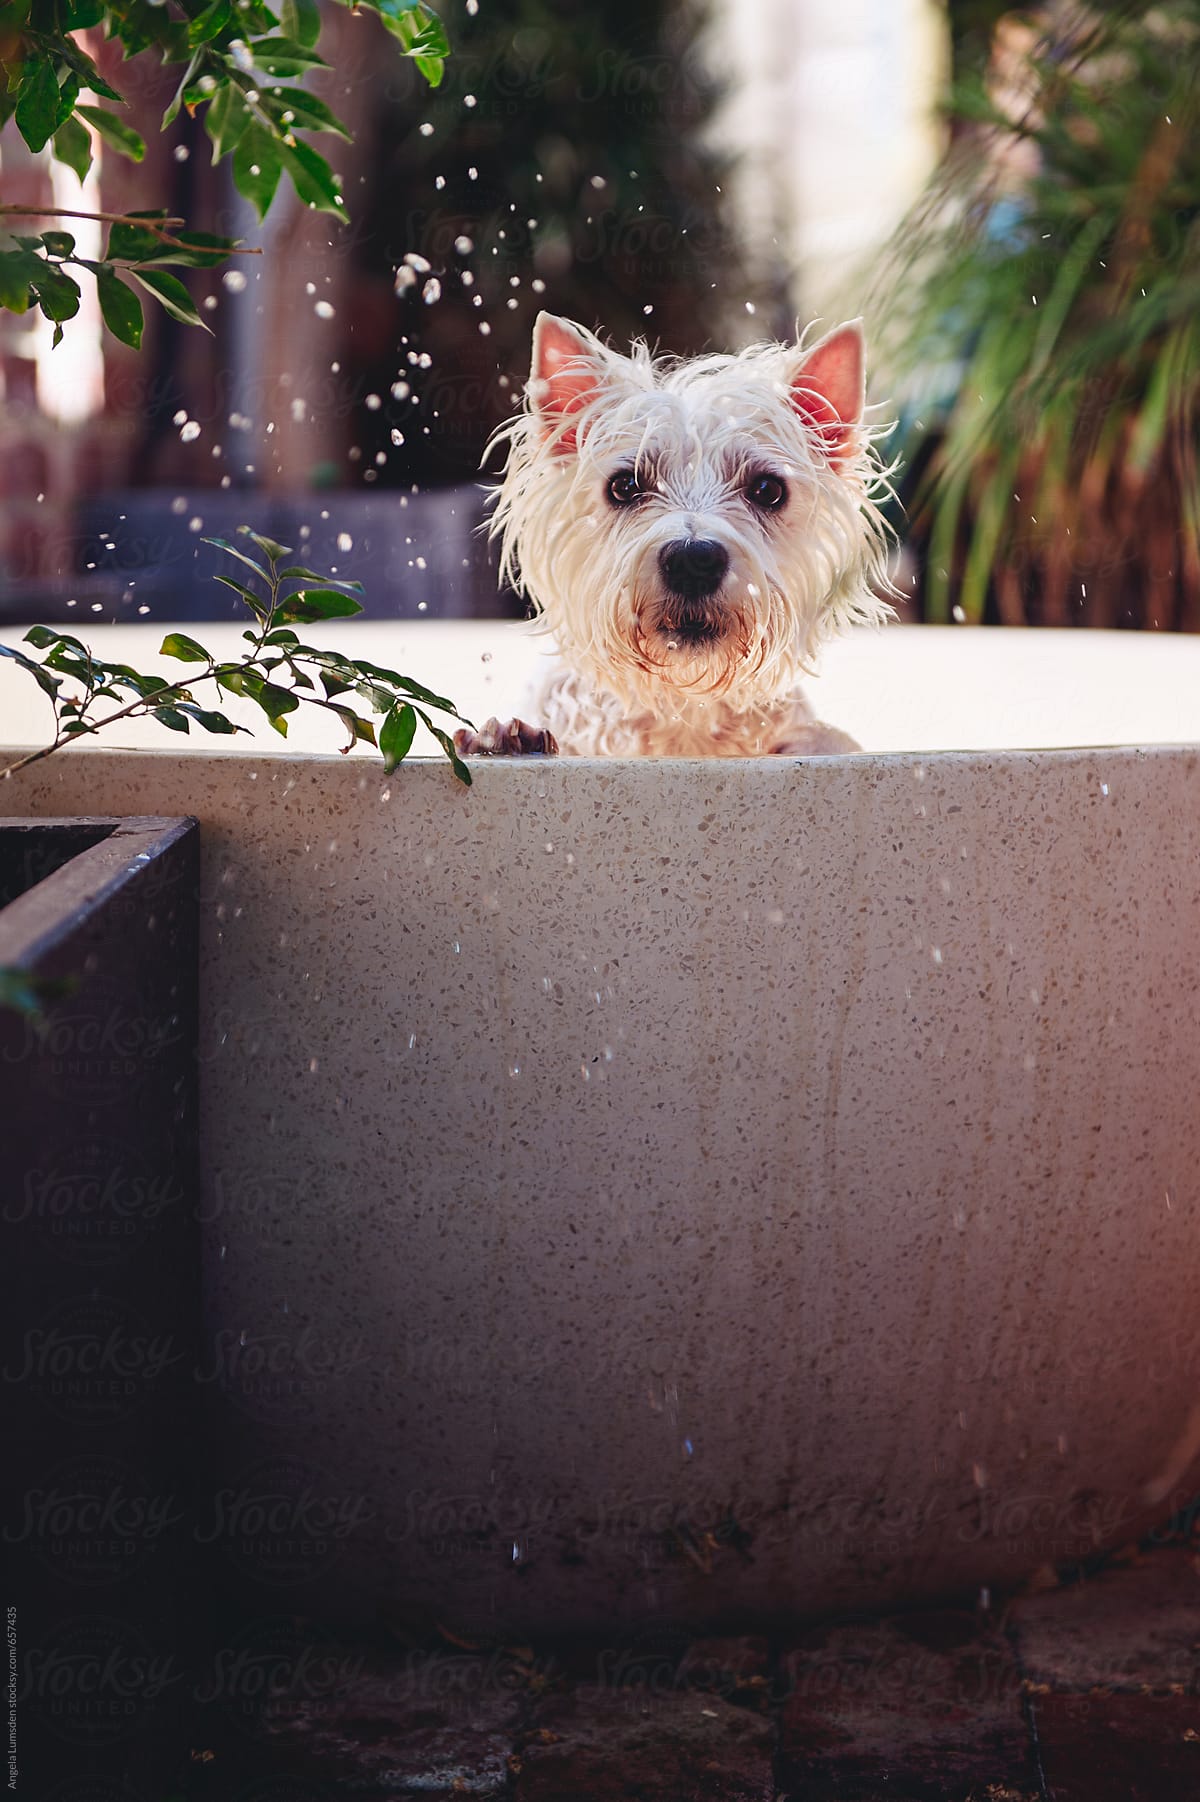 Small white dog looking up from the edge of an outdoor bath with water droplets in the air